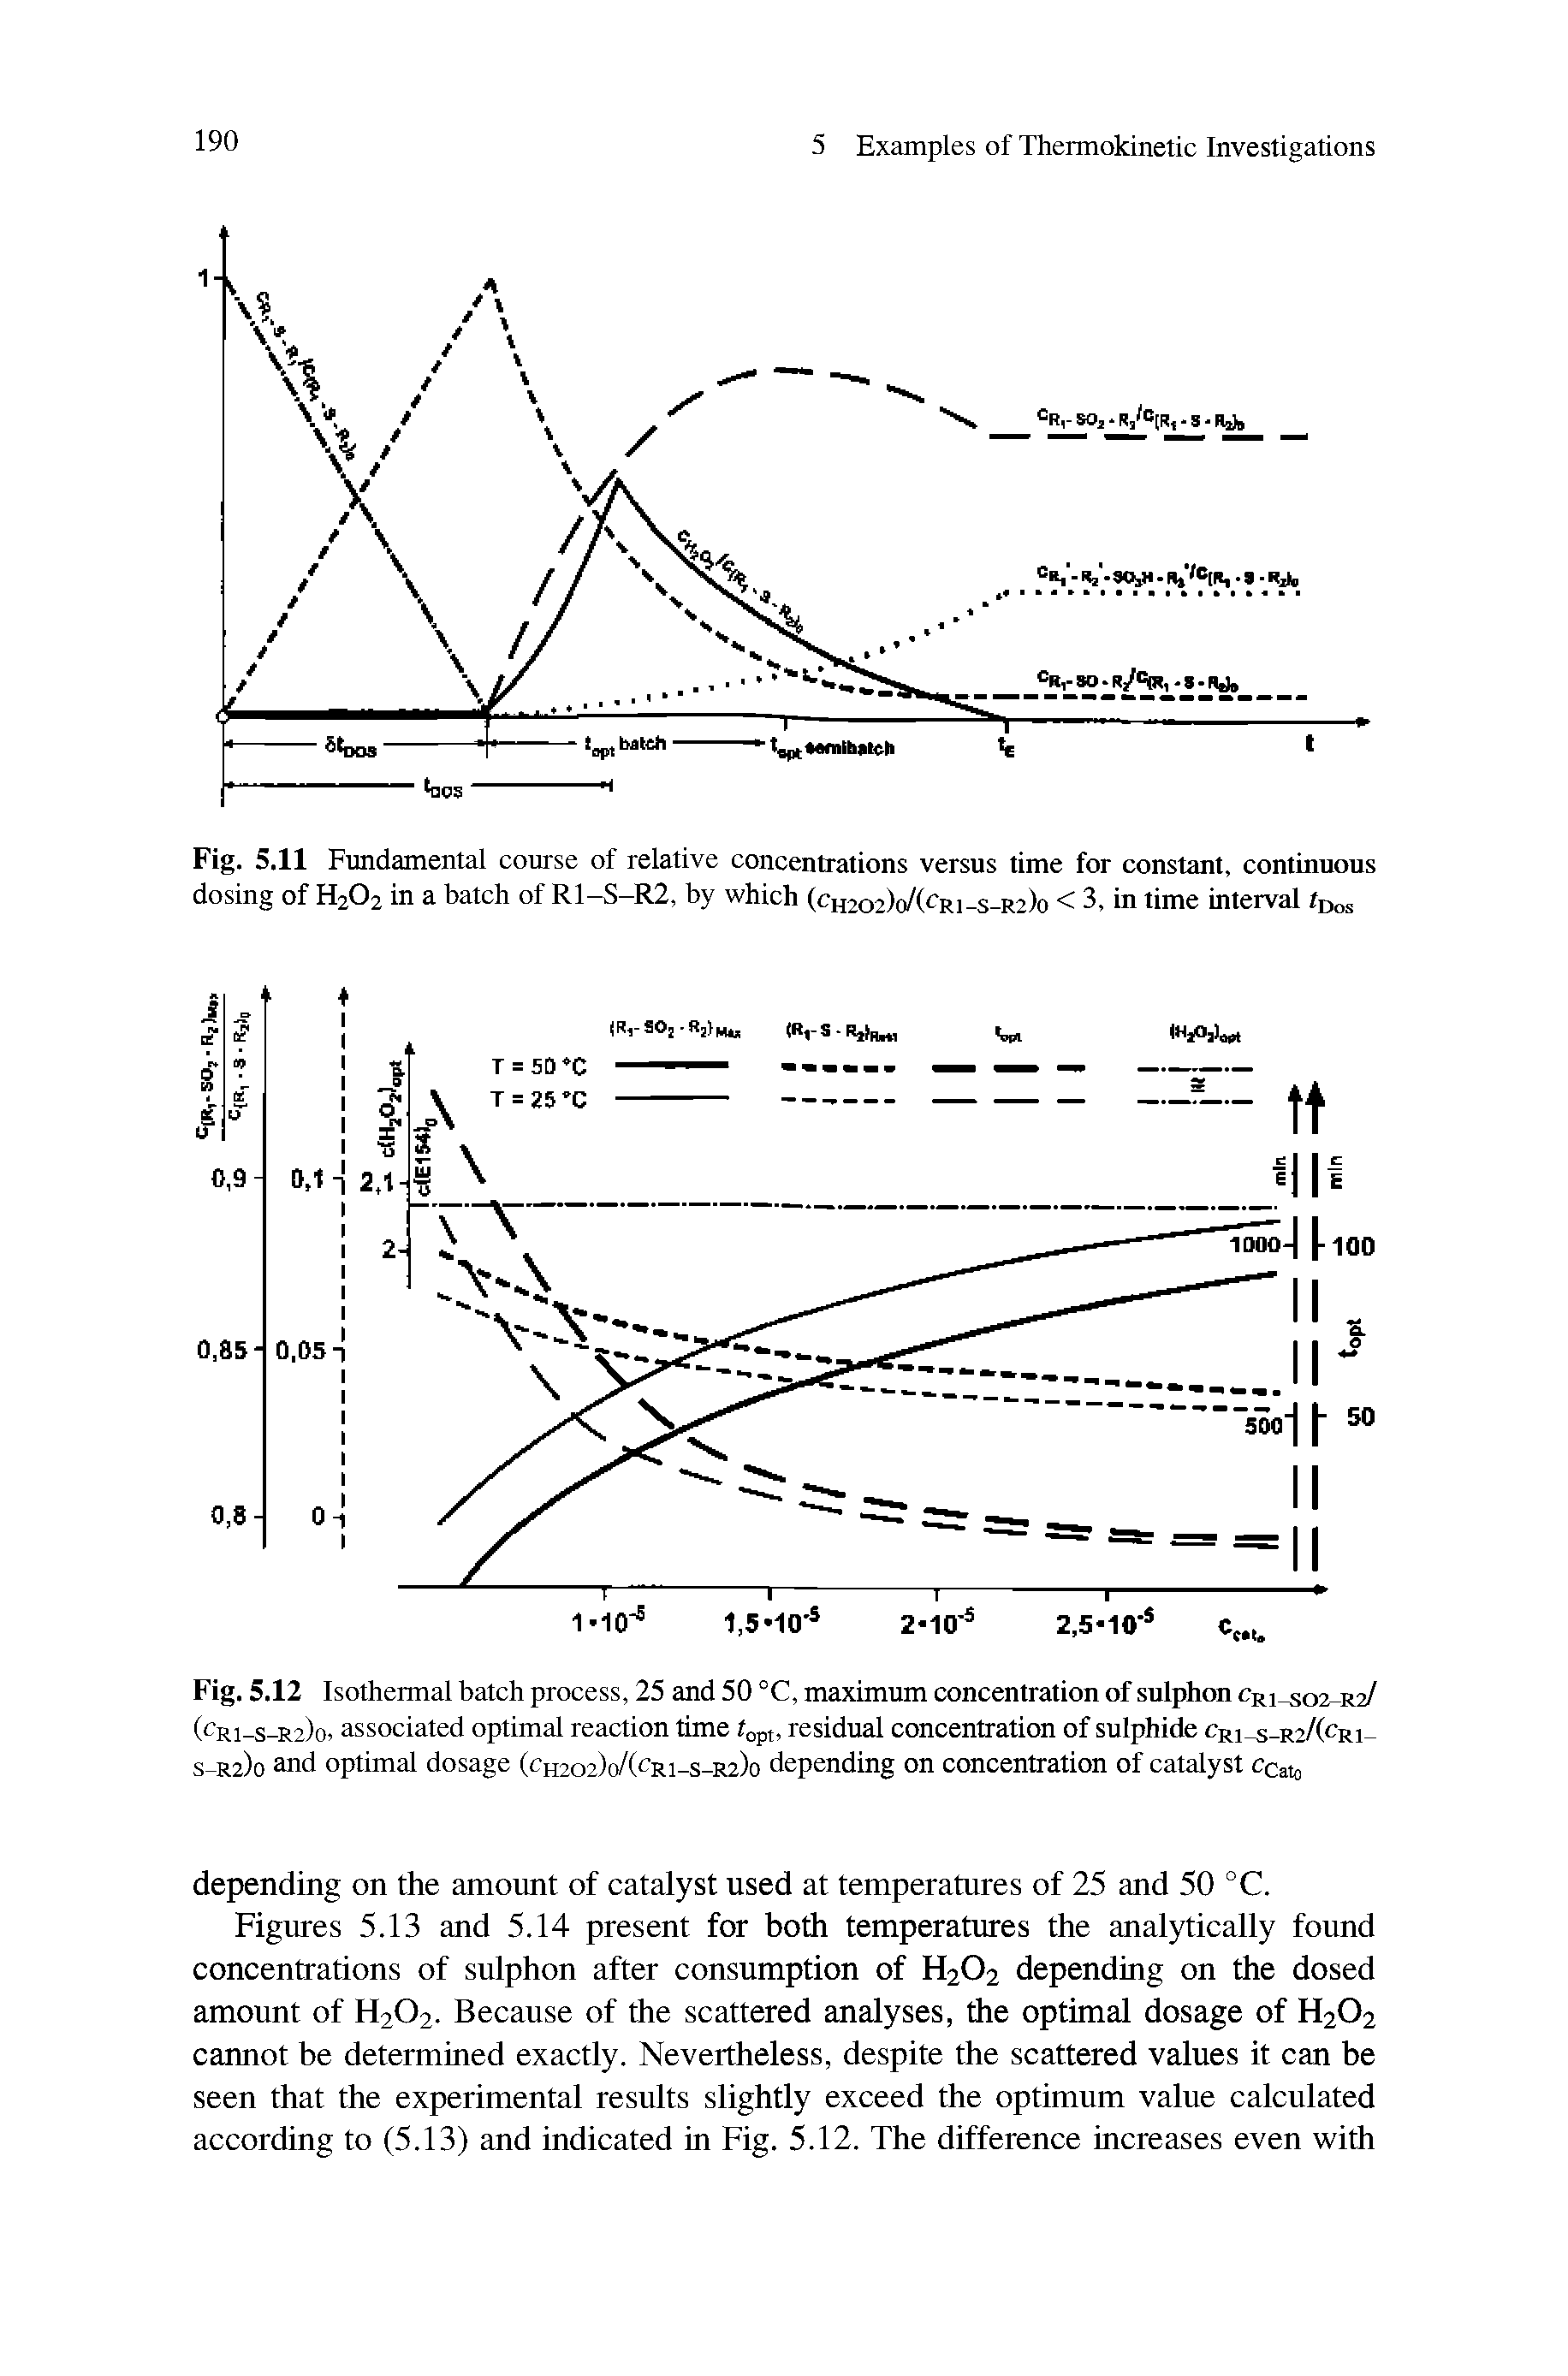 Figures 5.13 and 5.14 present for both temperatures the analytically found concentrations of sulphon after consumption of H2O2 depending on the dosed amount of H2O2. Because of the scattered analyses, the optimal dosage of H2O2 cannot be determined exactly. Nevertheless, despite the scattered values it can be seen that the experimental results slightly exceed the optimum value calculated according to (5.13) and indicated in Fig. 5.12. The difference increases even with...